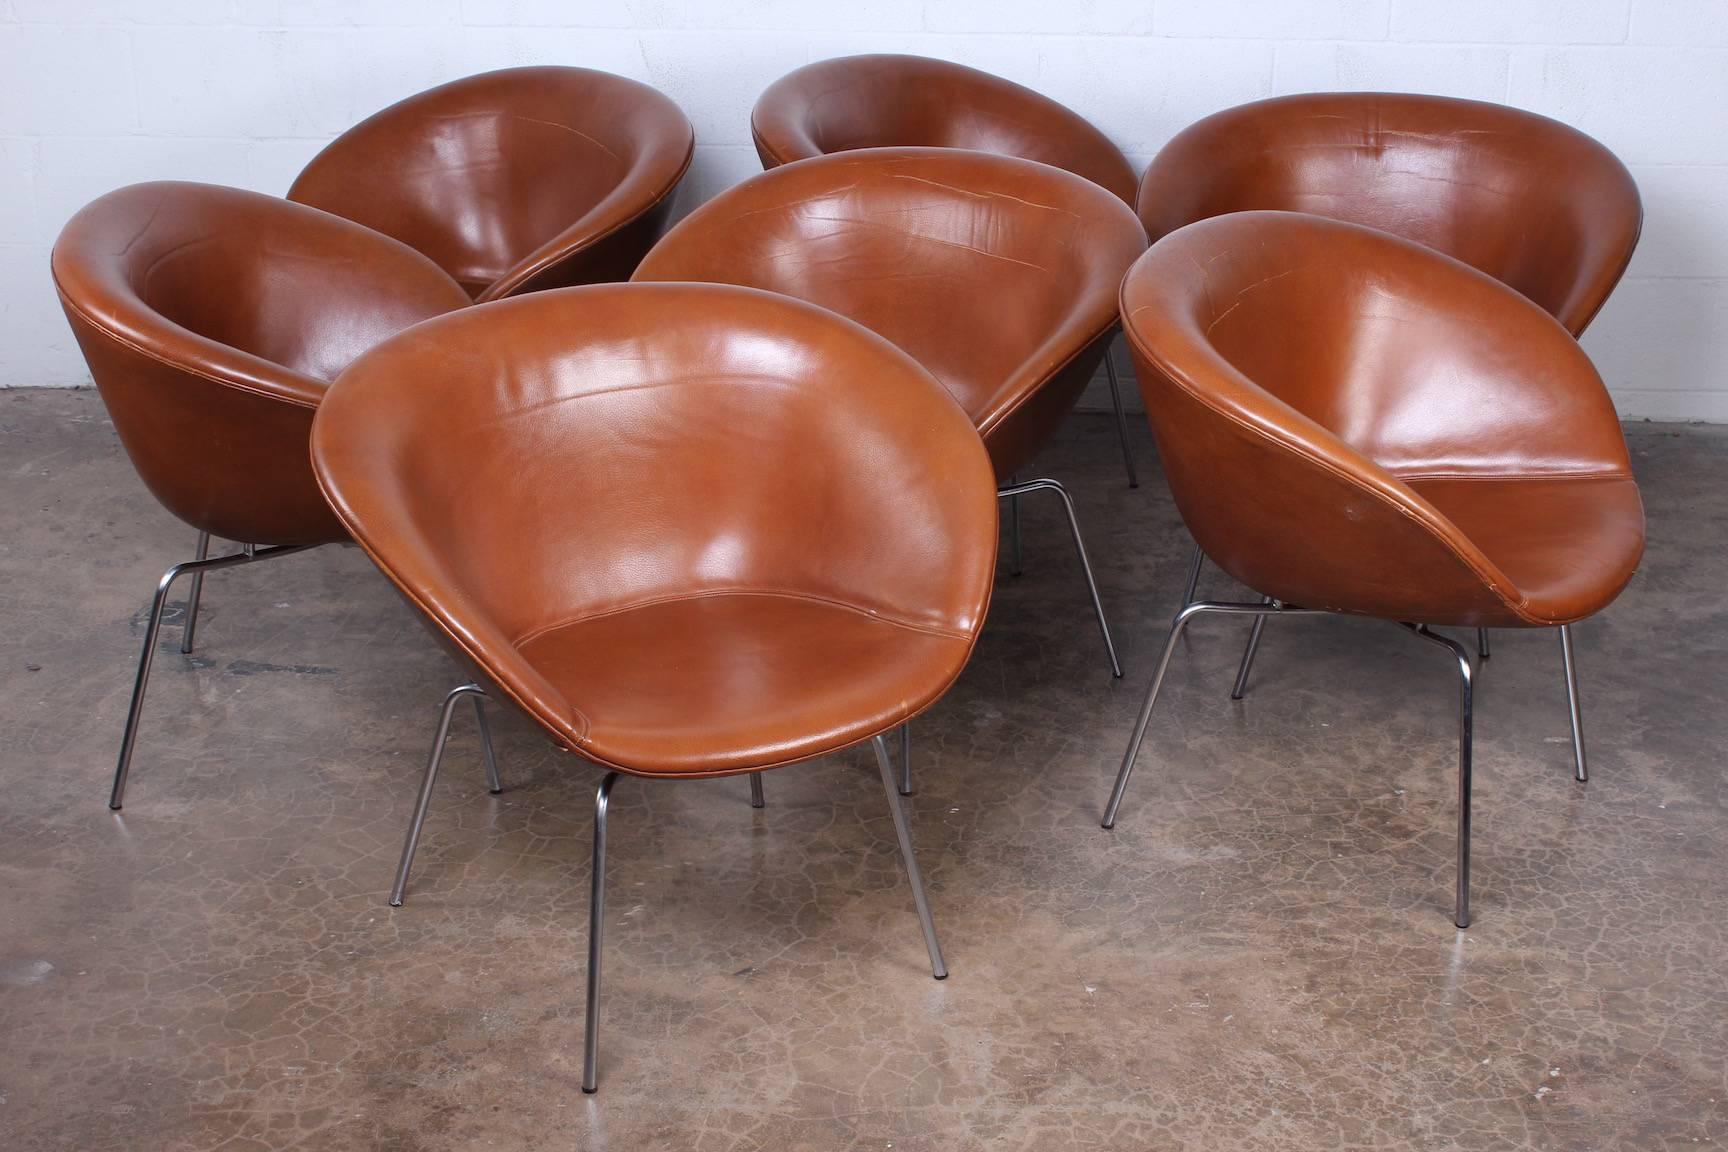 Arne Jacobsen Pot Chairs in Original Leather 9